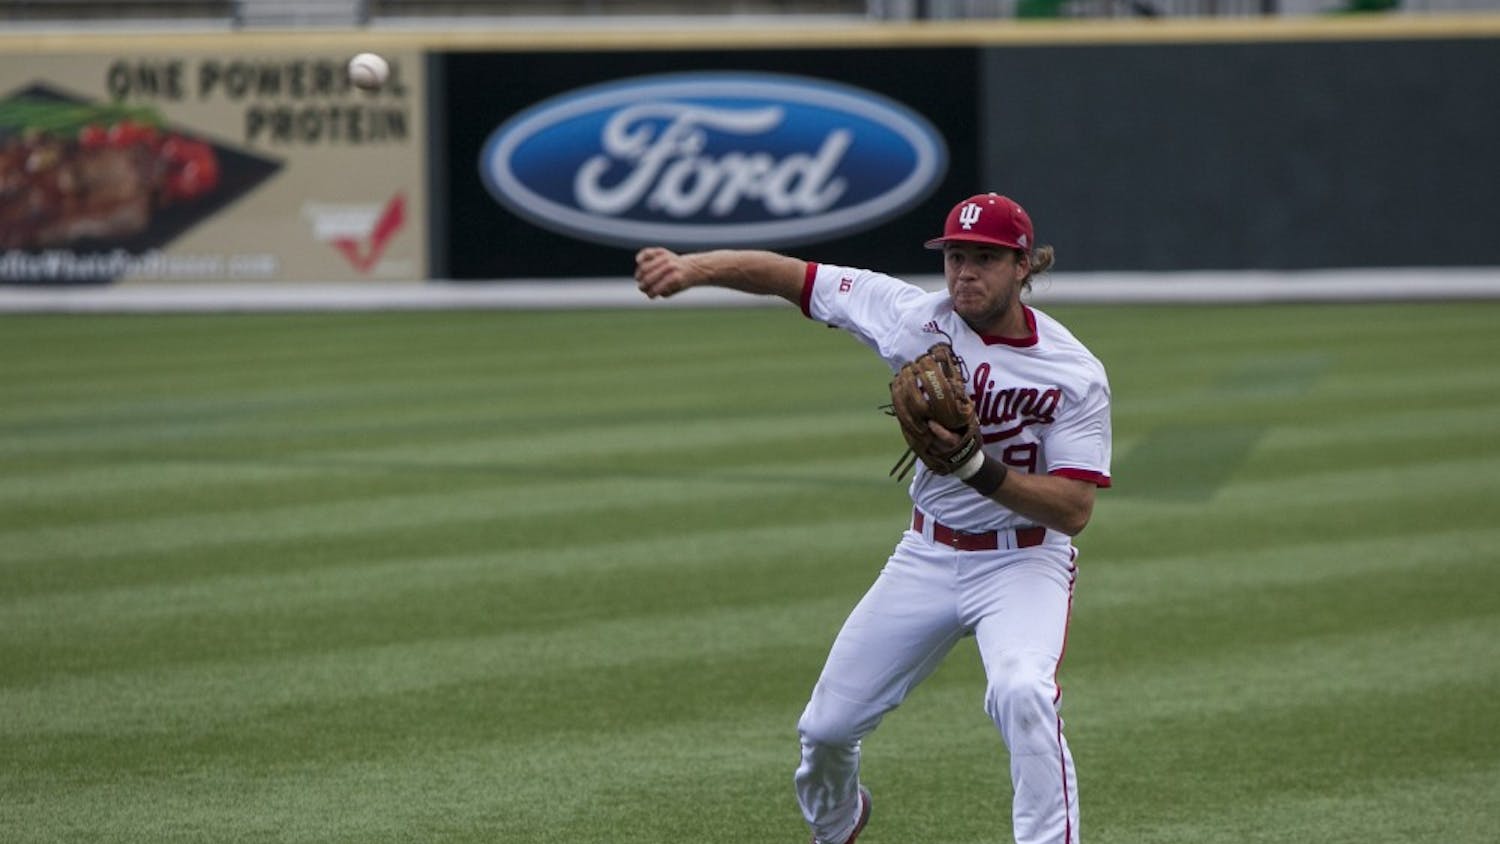 Senior second baseman Casey Rodrigue makes a throw on Sunday at Hawkins Field in Nashville, Tennessee. Indiana lost 5-3 to Radford in the elimination game of the NCAA Regional.